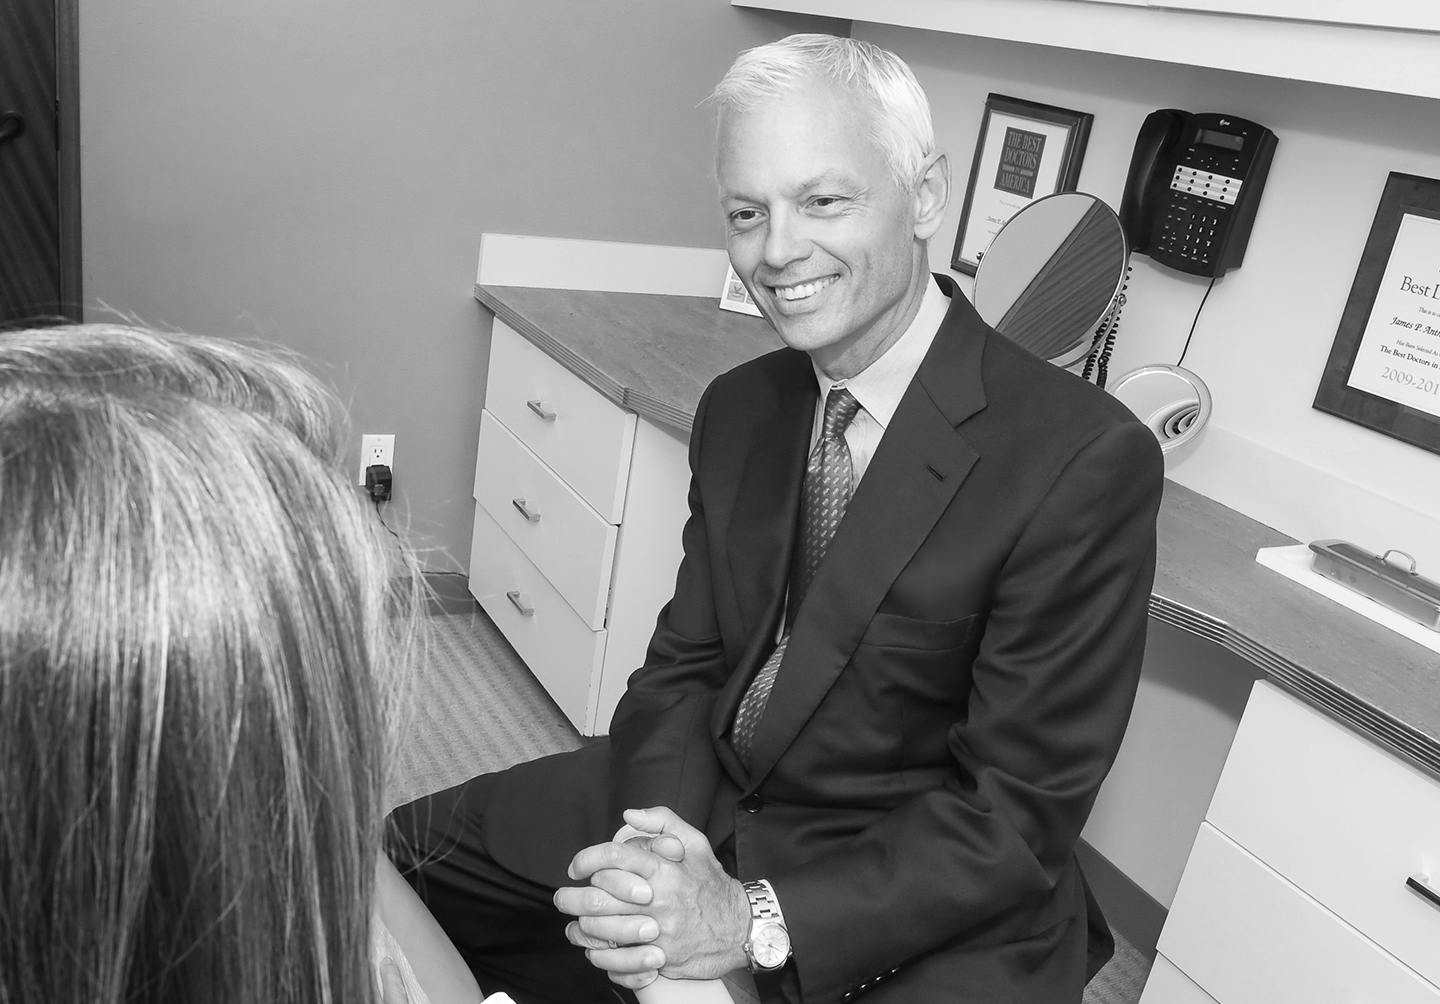 Dr. Anthony talking with a woman client